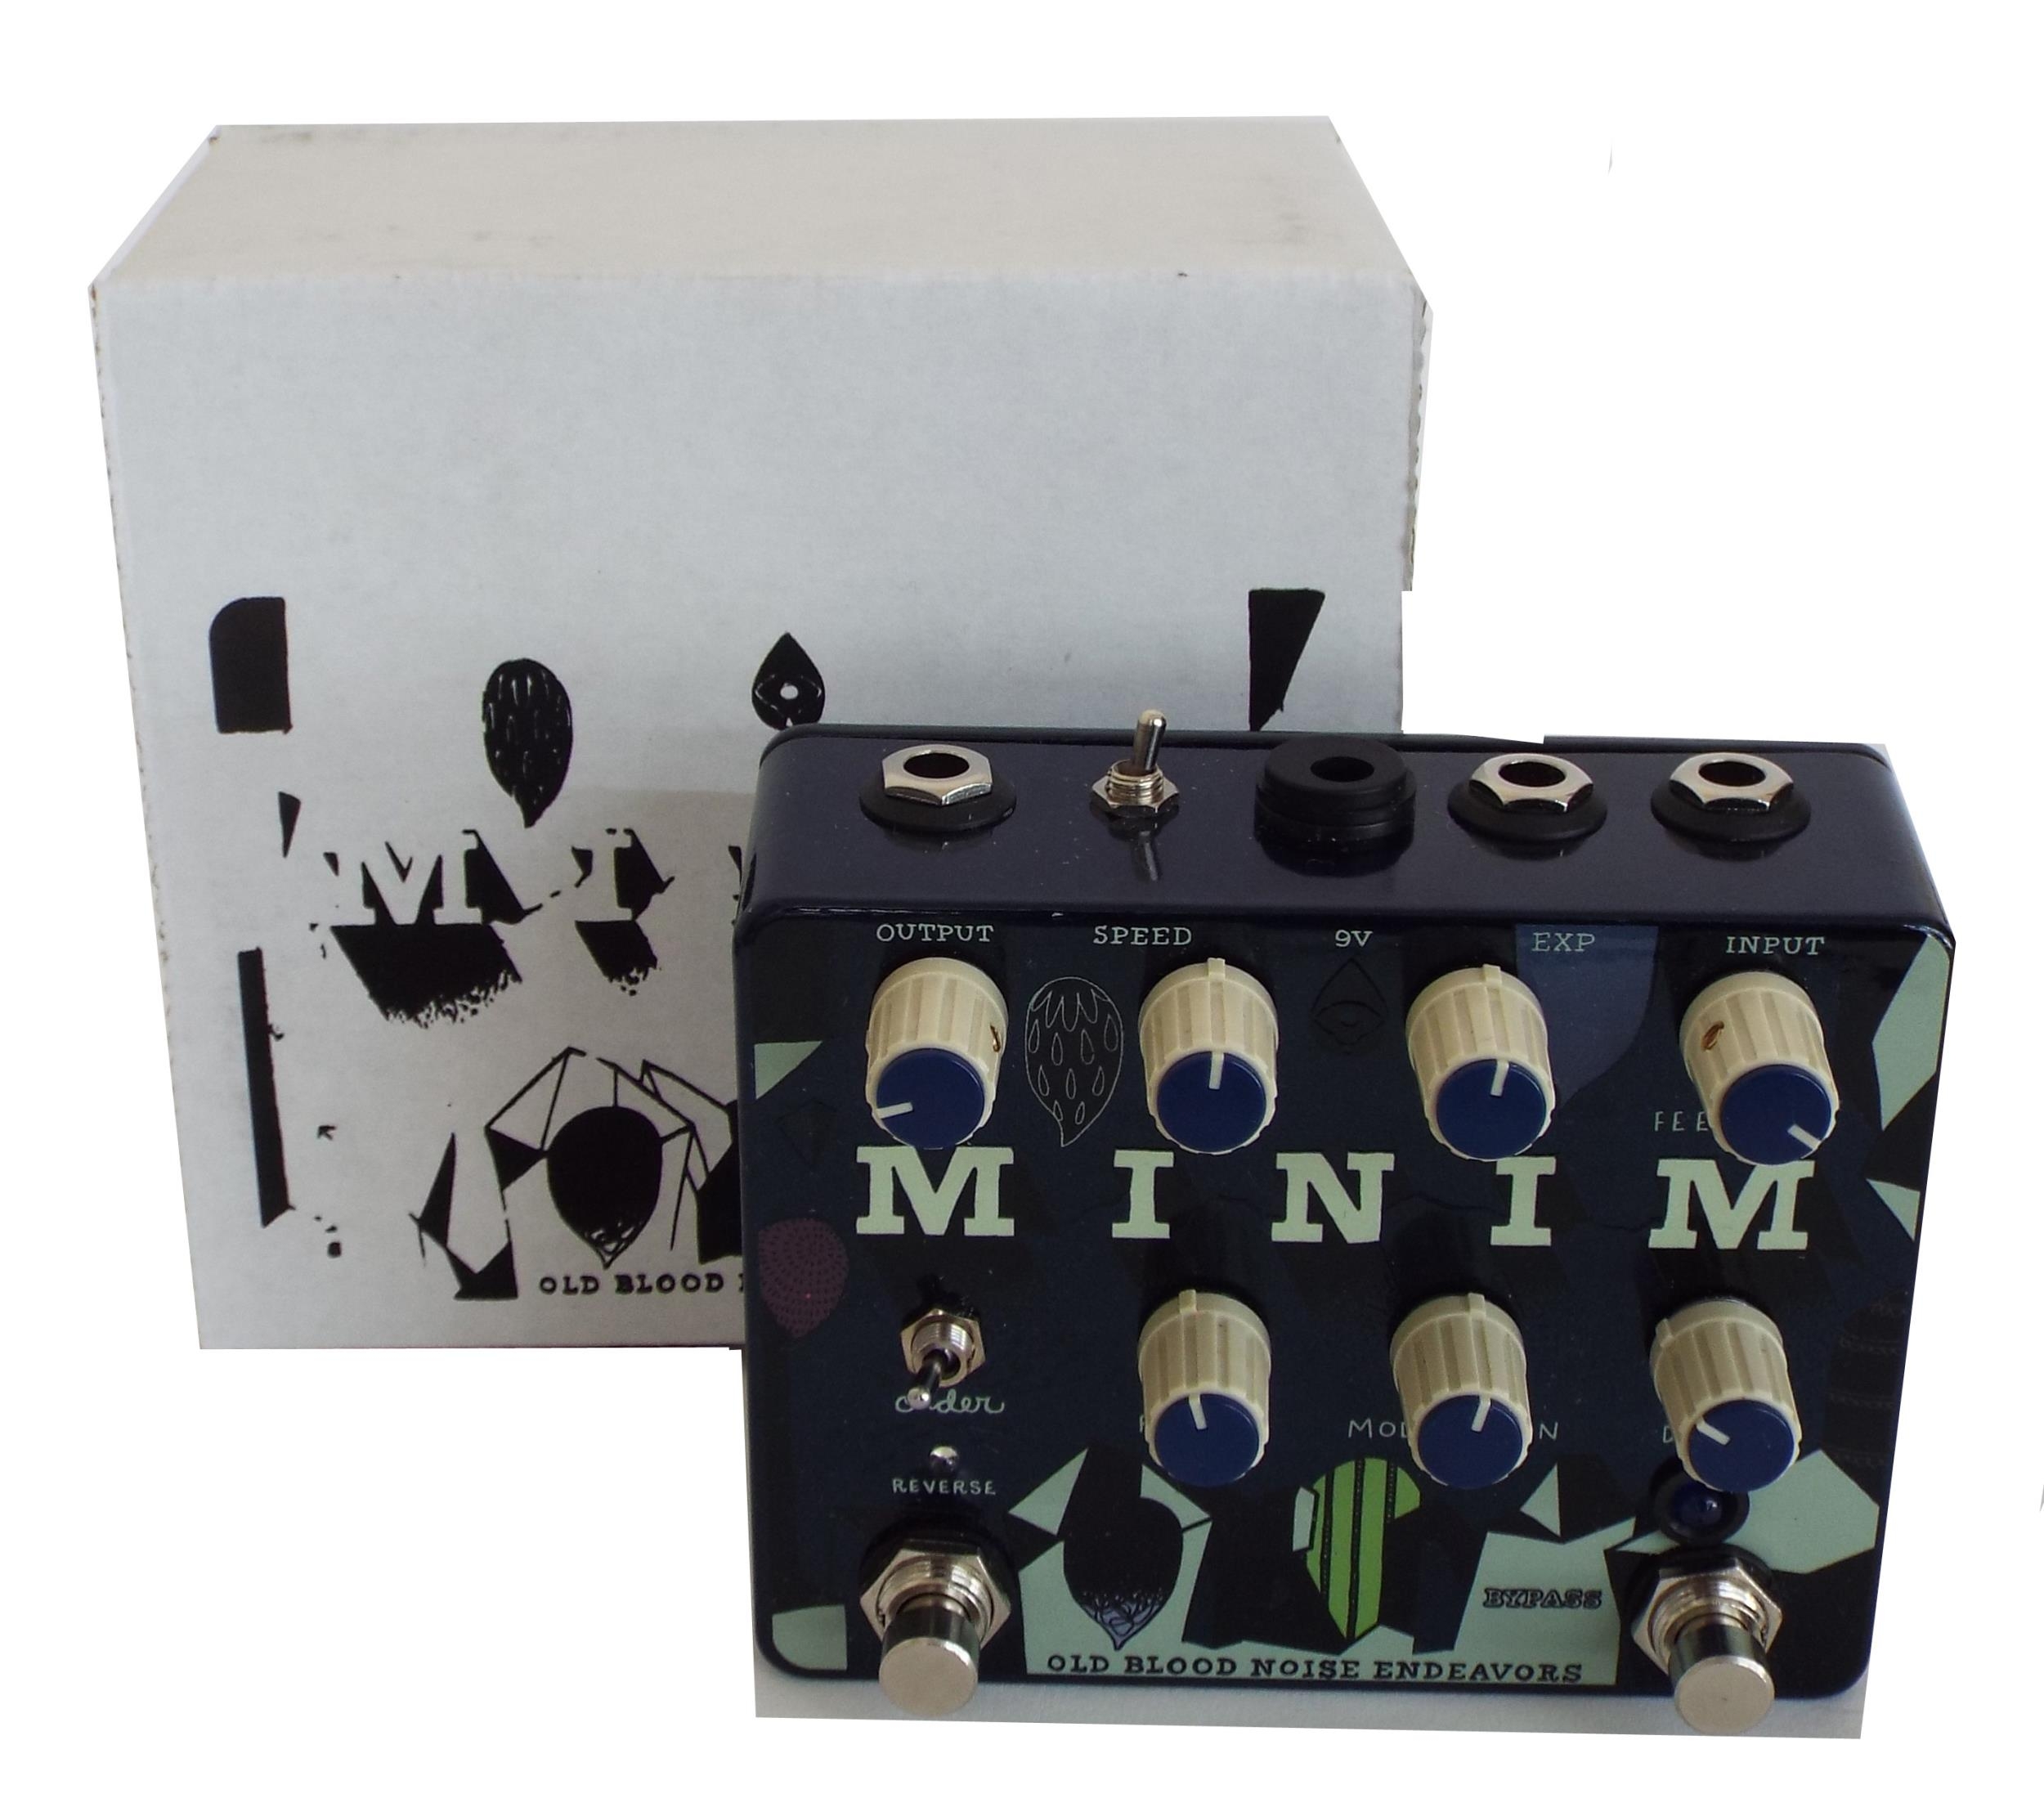 New and boxed - Old Blood Noise Endeavors Minim guitar pedal